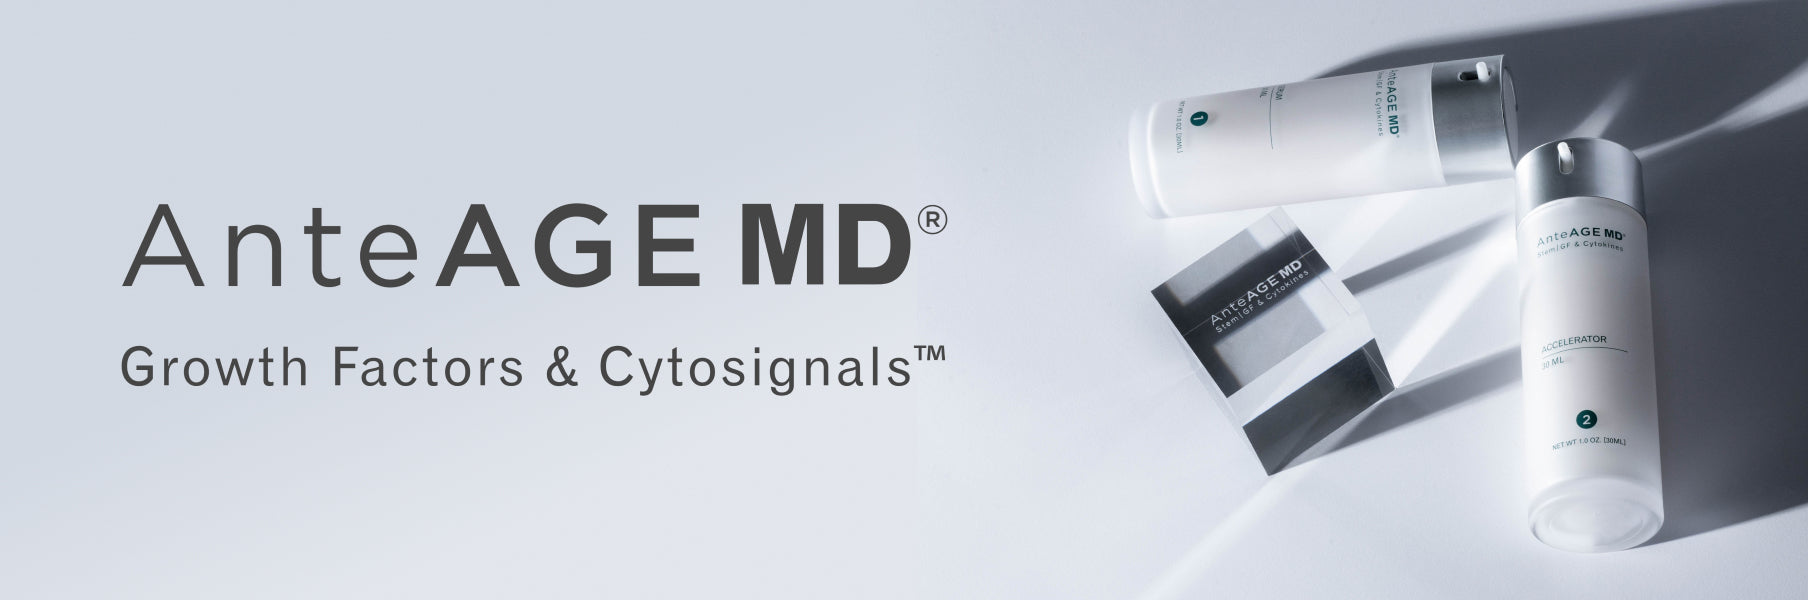 The AnteAGE MD System laying on a pale grey background with a glass cube engraved with "AnteAGE MD Stem | GF & Cytokines", along with the AnteAGE MD logo